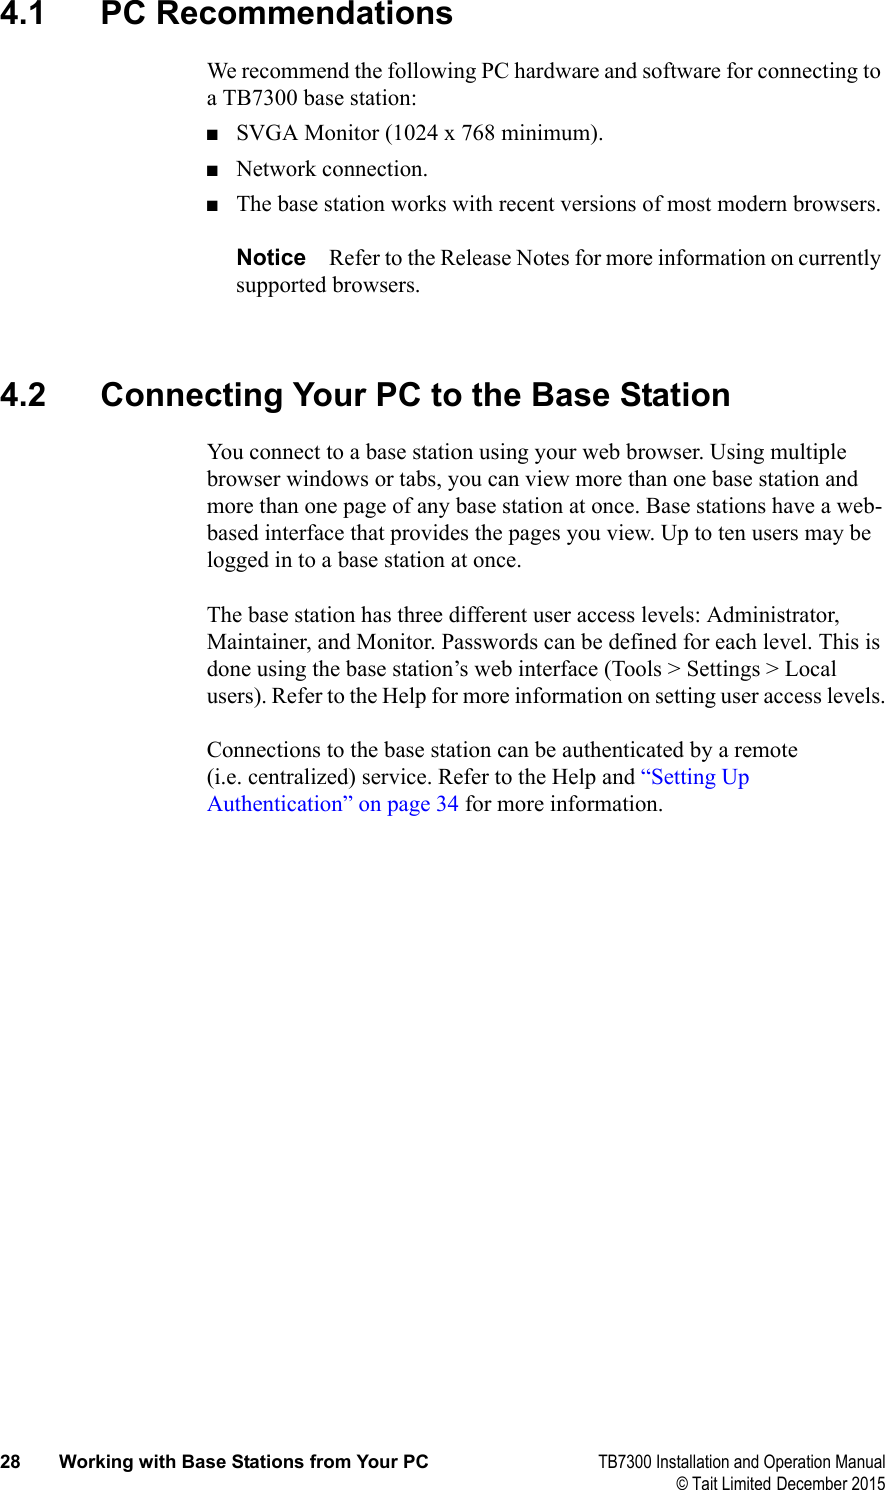  28 Working with Base Stations from Your PC TB7300 Installation and Operation Manual© Tait Limited December 20154.1 PC RecommendationsWe recommend the following PC hardware and software for connecting to a TB7300 base station:■SVGA Monitor (1024 x 768 minimum).■Network connection.■The base station works with recent versions of most modern browsers.Notice Refer to the Release Notes for more information on currently supported browsers. 4.2 Connecting Your PC to the Base StationYou connect to a base station using your web browser. Using multiple browser windows or tabs, you can view more than one base station and more than one page of any base station at once. Base stations have a web-based interface that provides the pages you view. Up to ten users may be logged in to a base station at once.The base station has three different user access levels: Administrator, Maintainer, and Monitor. Passwords can be defined for each level. This is done using the base station’s web interface (Tools &gt; Settings &gt; Local users). Refer to the Help for more information on setting user access levels.Connections to the base station can be authenticated by a remote (i.e. centralized) service. Refer to the Help and “Setting Up Authentication” on page 34 for more information.